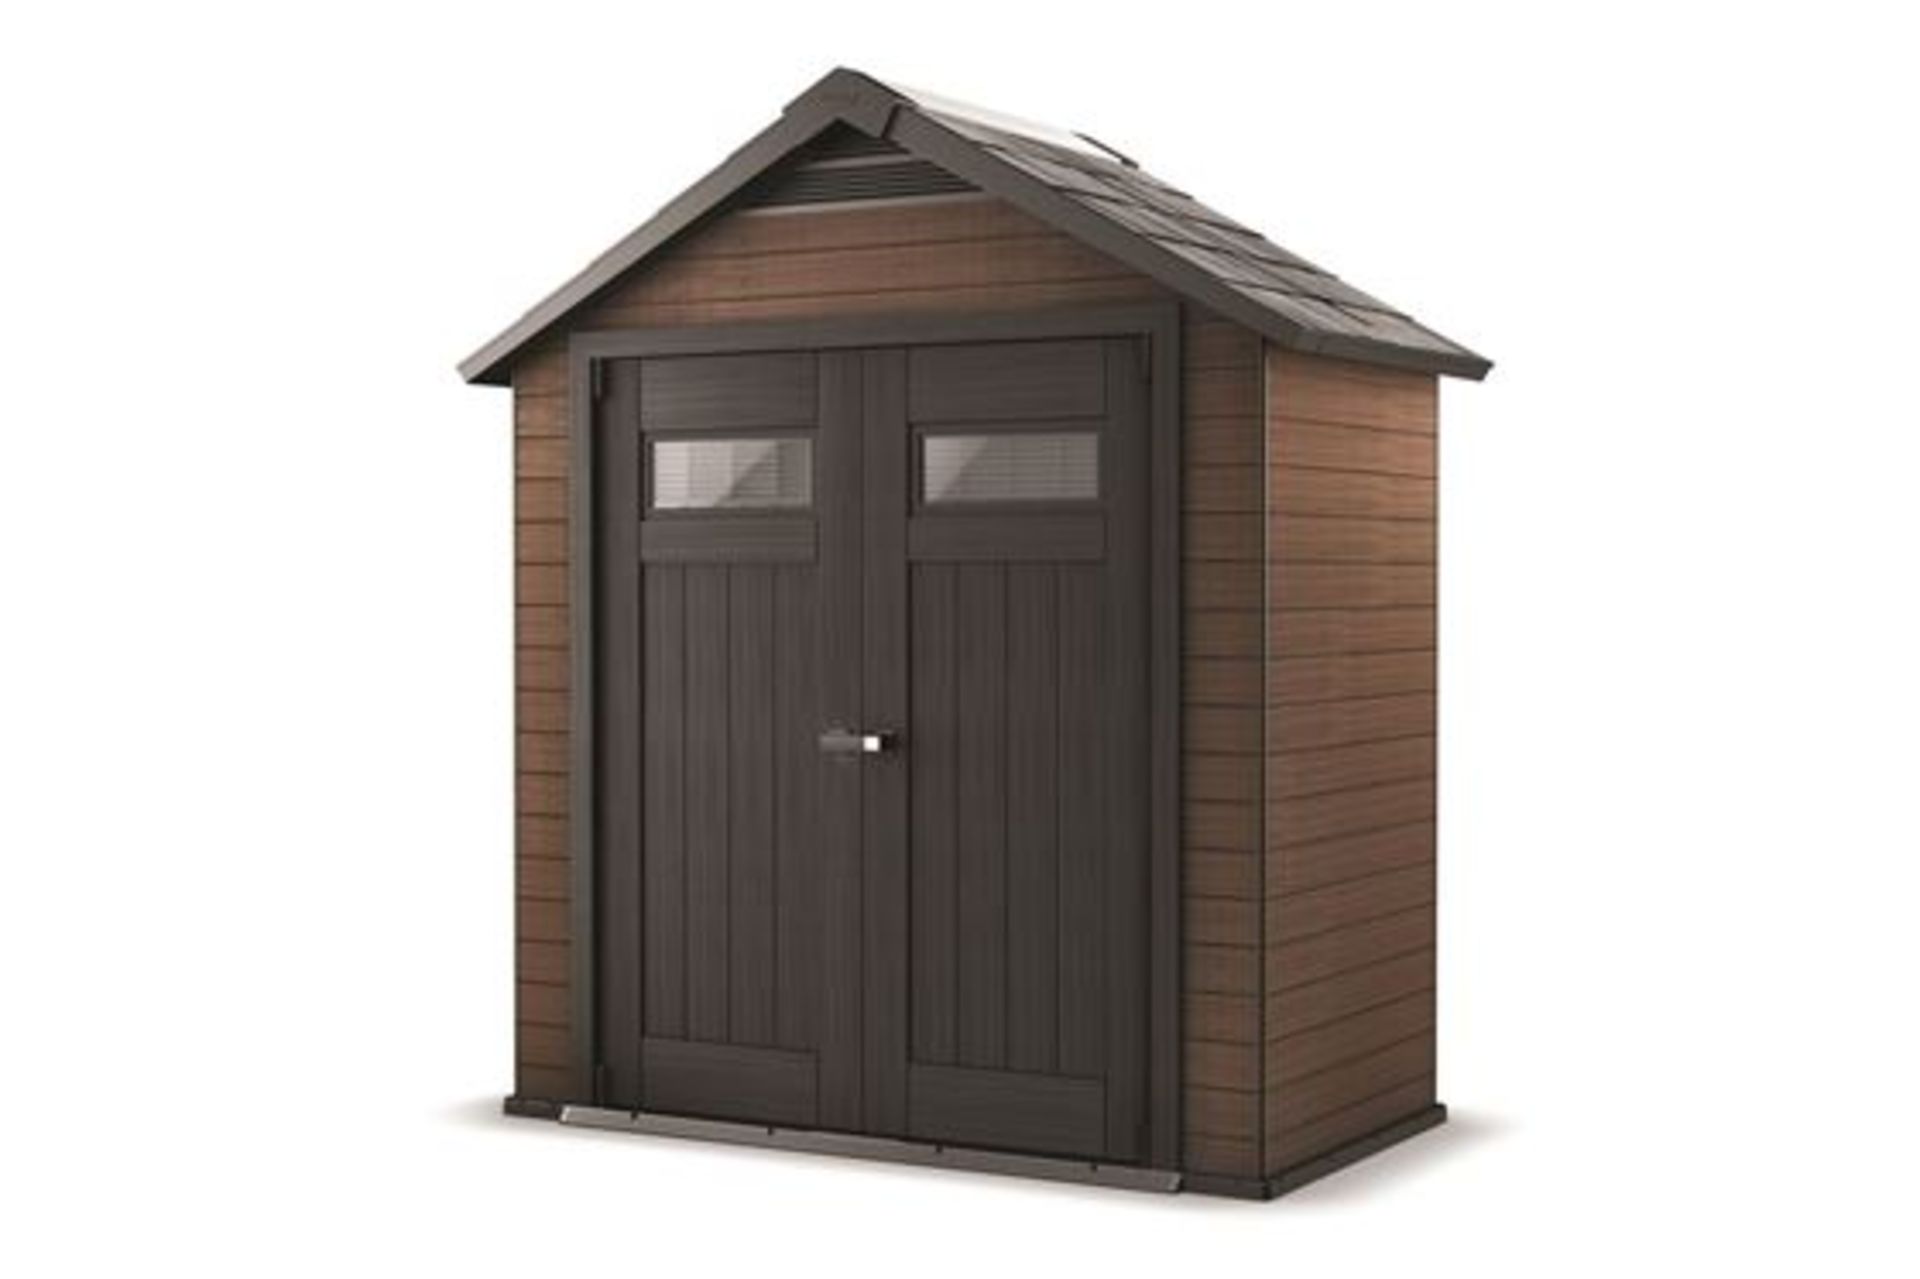 Keter Fusion 754 Garden Shed - New but Unboxed On Pallet